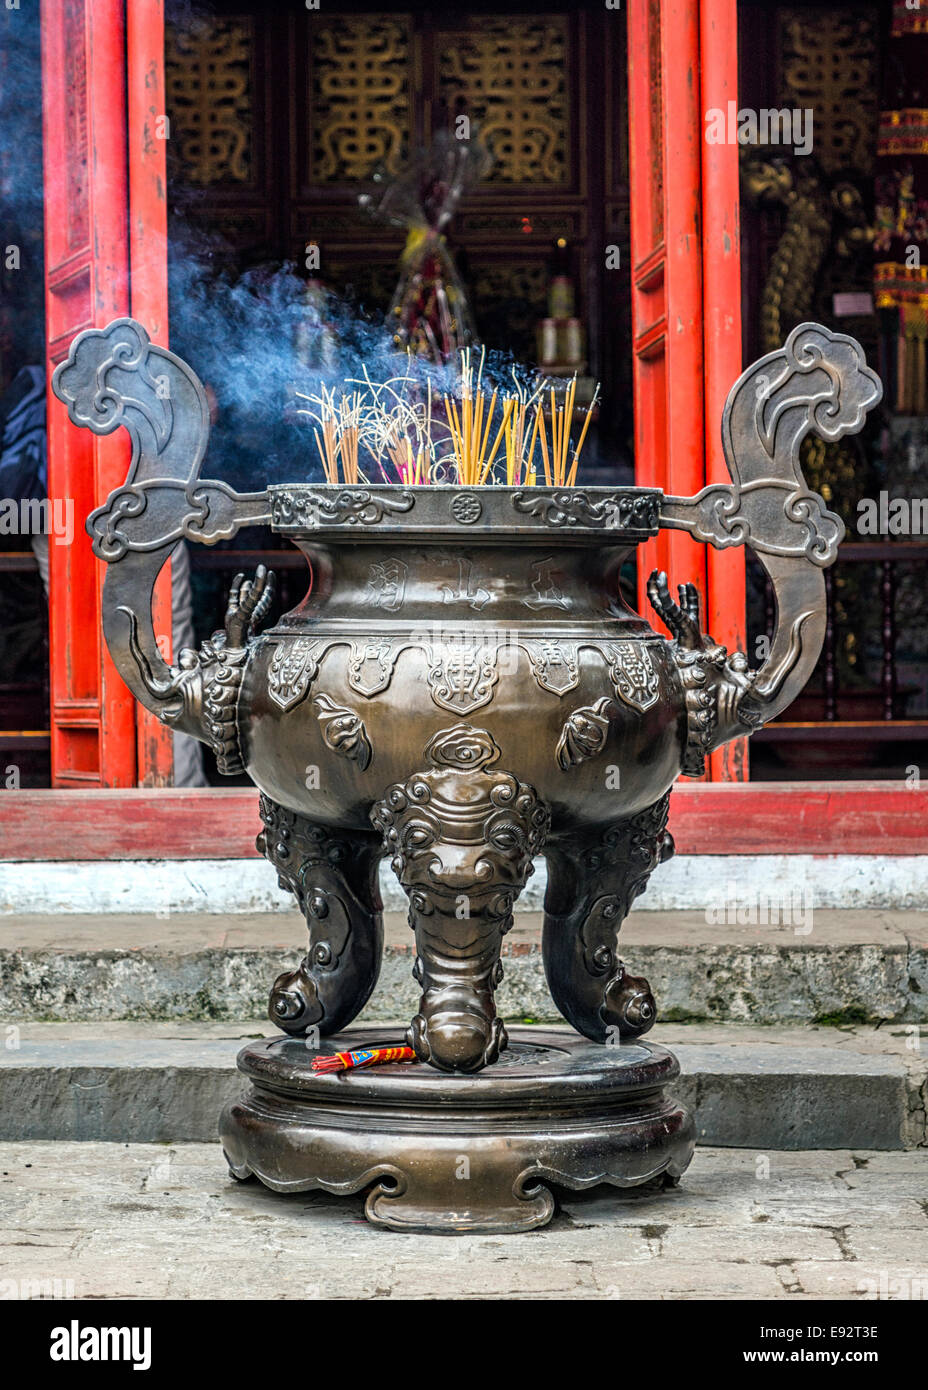 Three legged offer vase with burning incense at Ngo-Son temple in Hoan Kiem Lake. Stock Photo